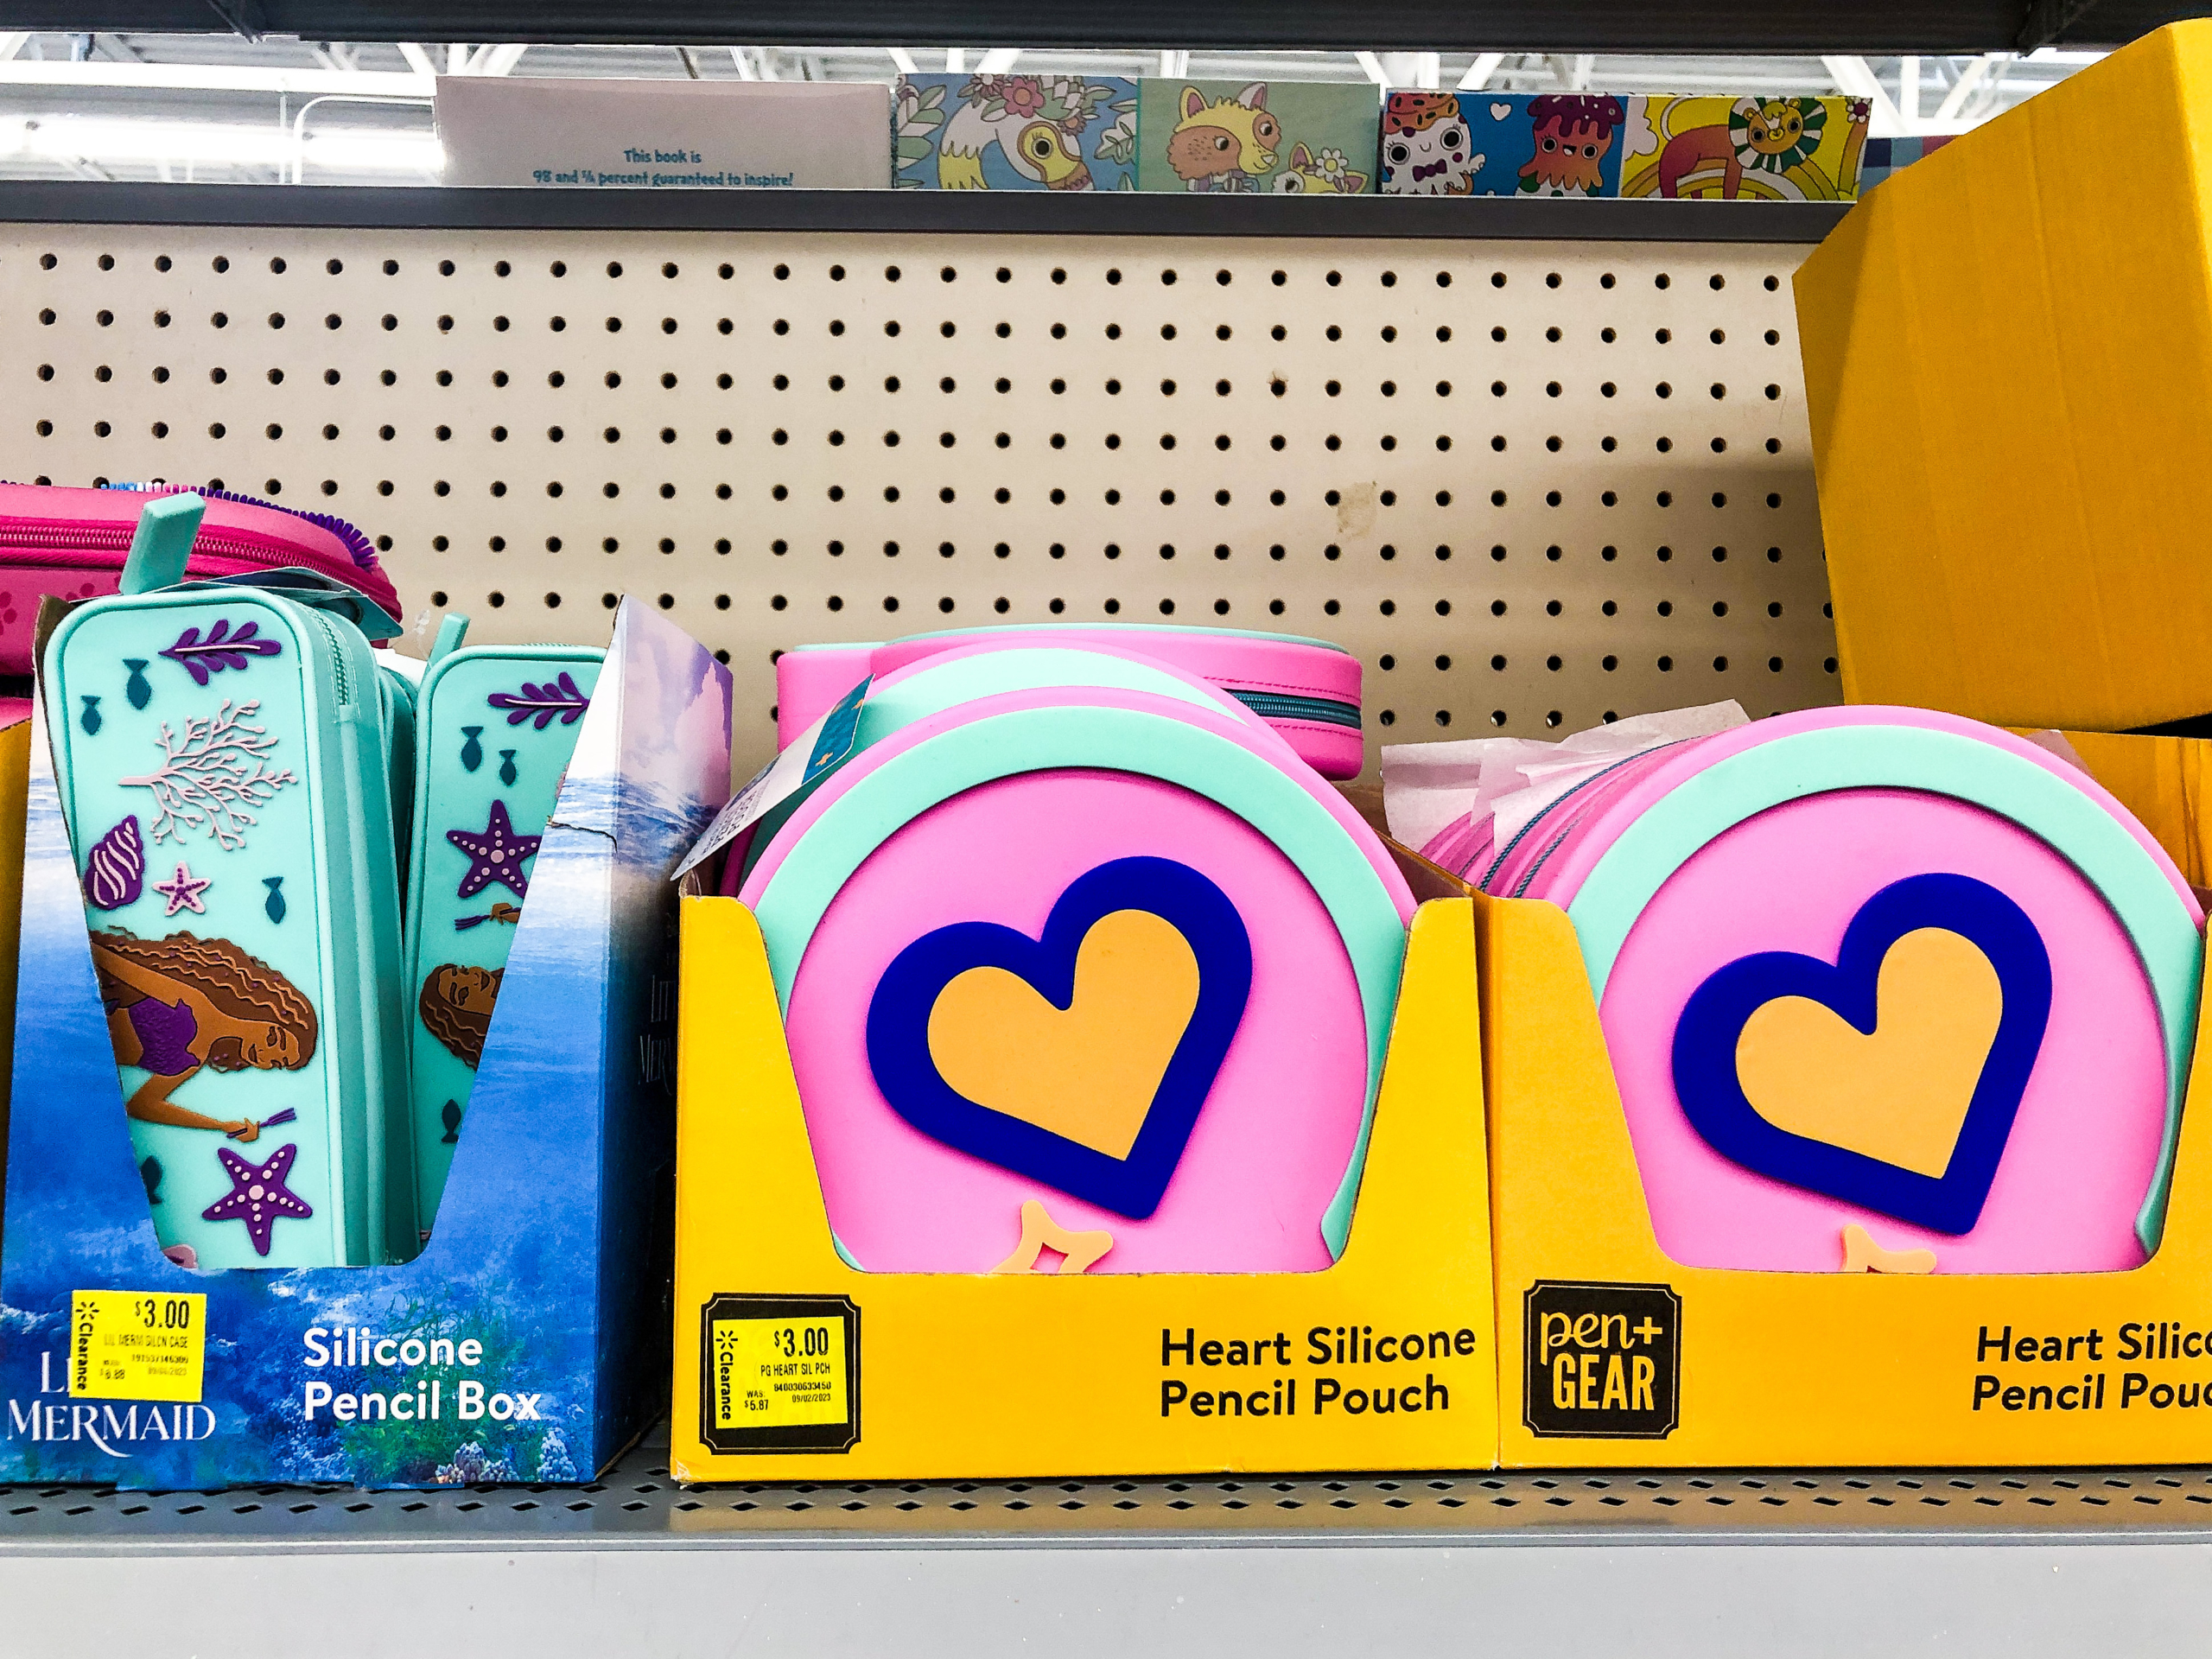 Where are the best back-to-school deals? Staples, Target, Walmart